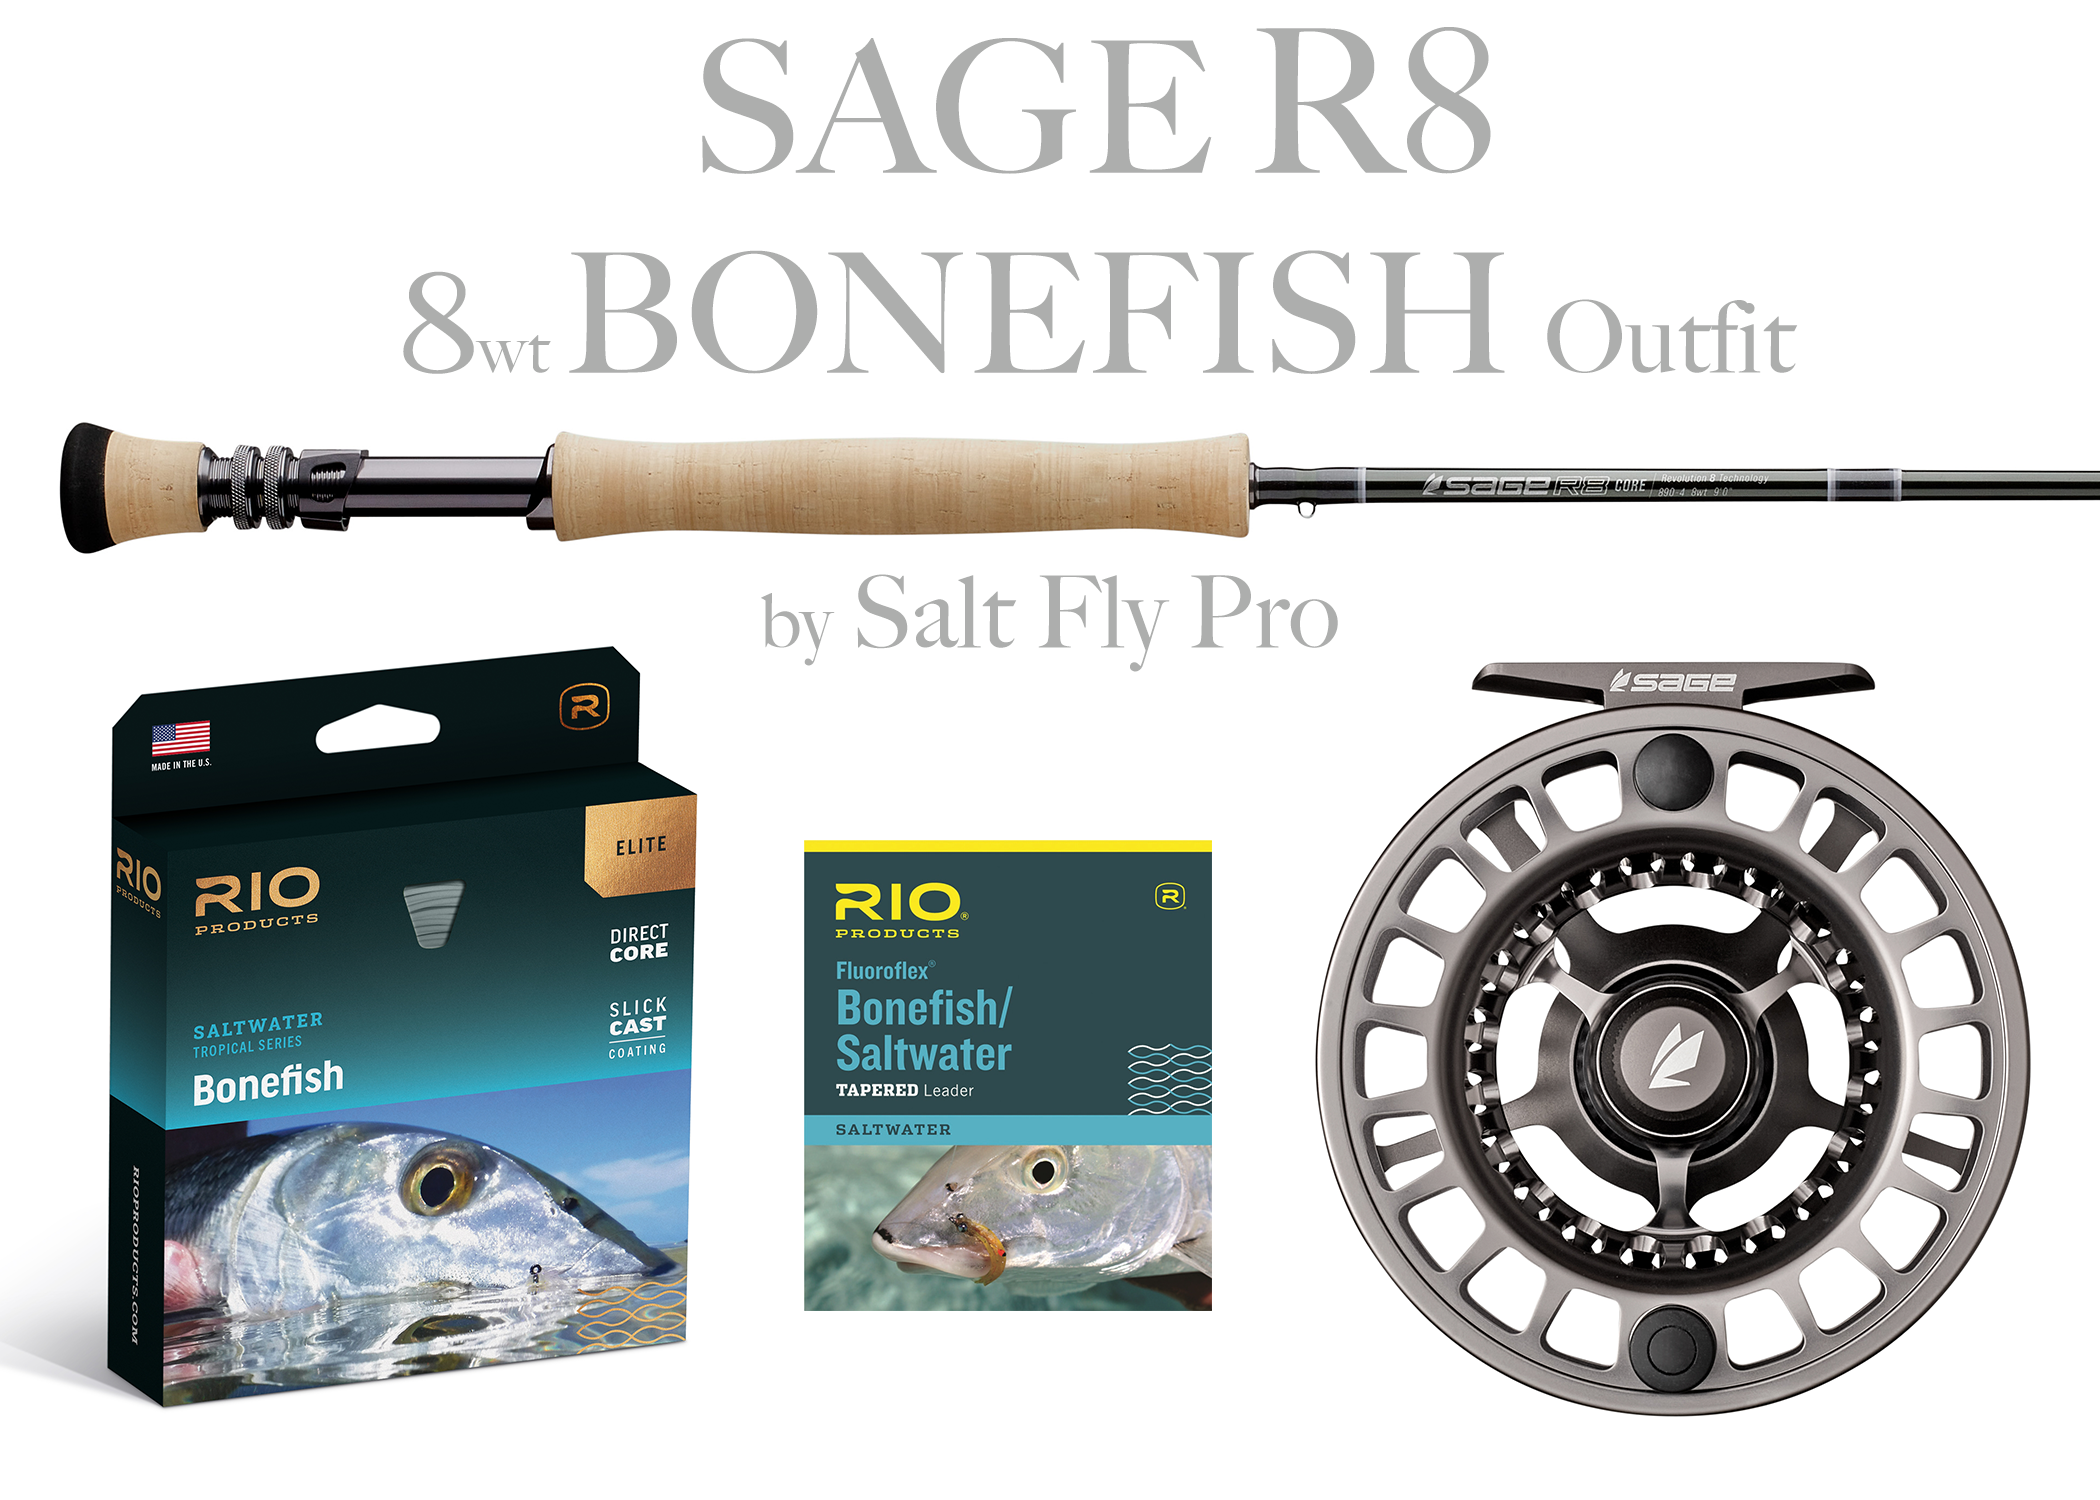 Sage R8 Core 8wt BONEFISH Fly Rod Outfit Combo - NEW!